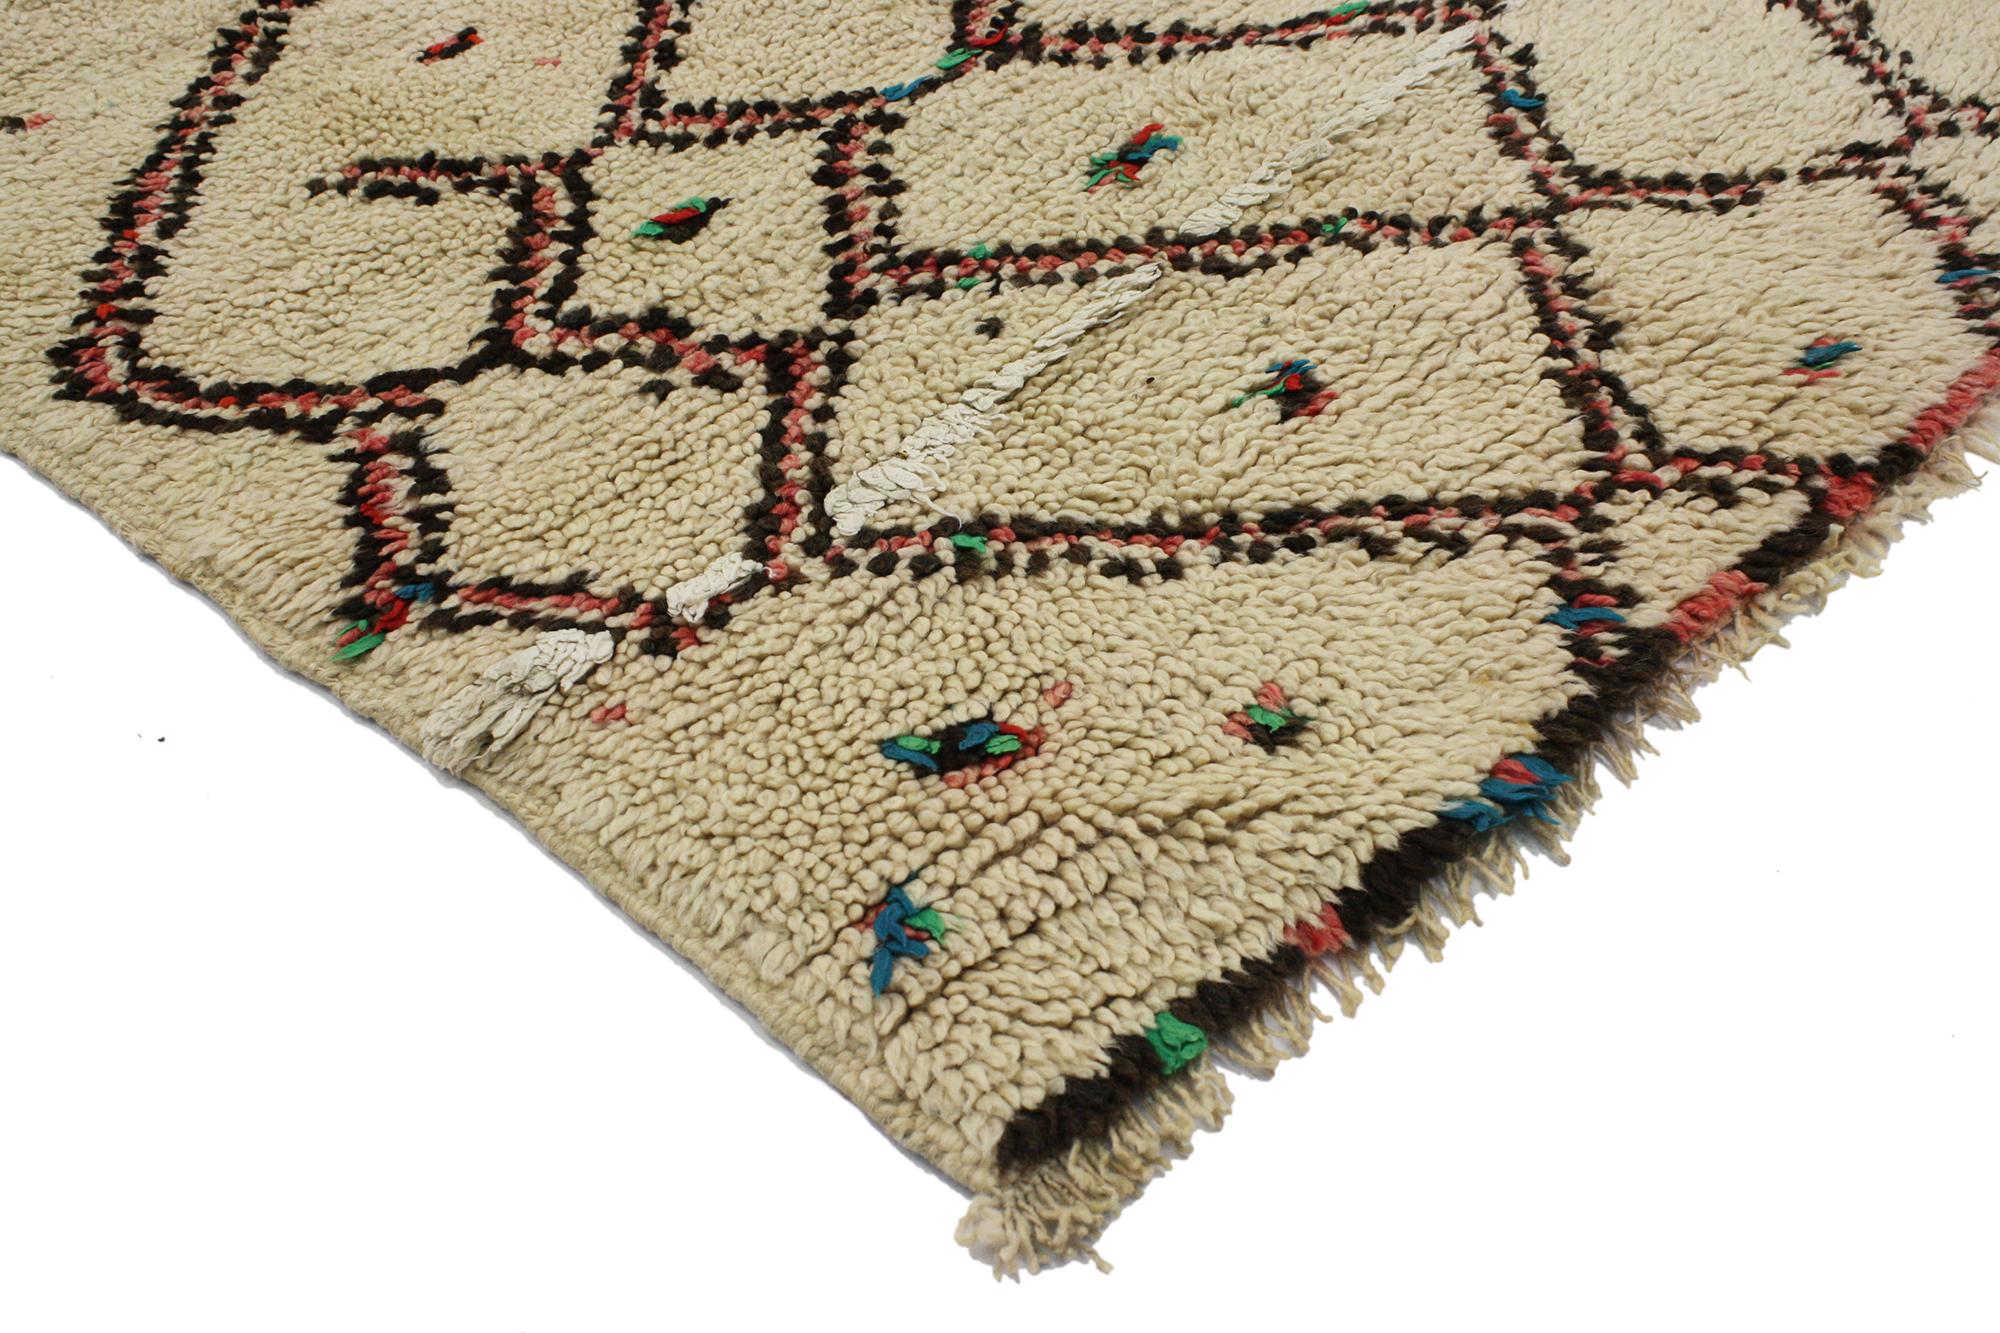 74569, vintage Berber Moroccan Azilal rug, Ait Bou Ichaouen Talsint. This hand-knotted wool vintage Moroccan Ait Bou Ichaouen Talsint rug beautifully showcases an asymmetrical diamond lattice. The subtlety of a cream colored background allows the